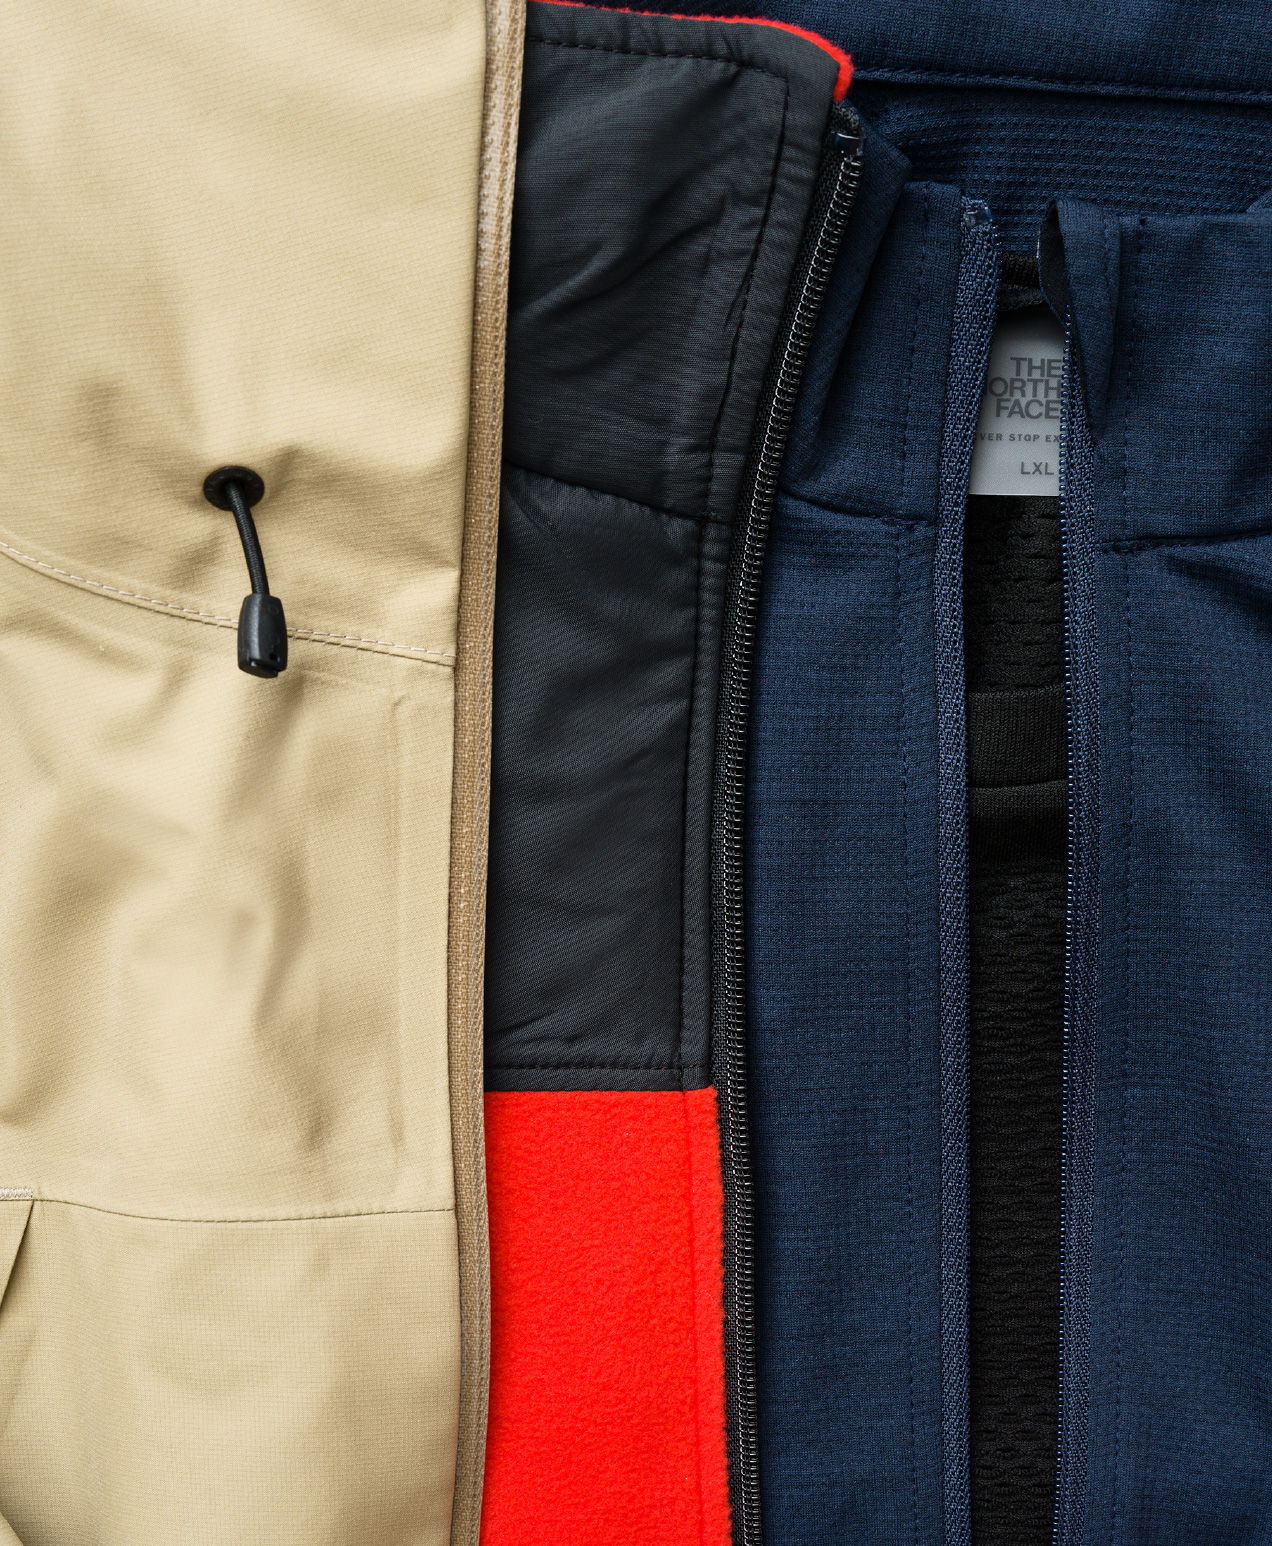 LAYERING | WEATHER SYSTEM | THE NORTH FACE